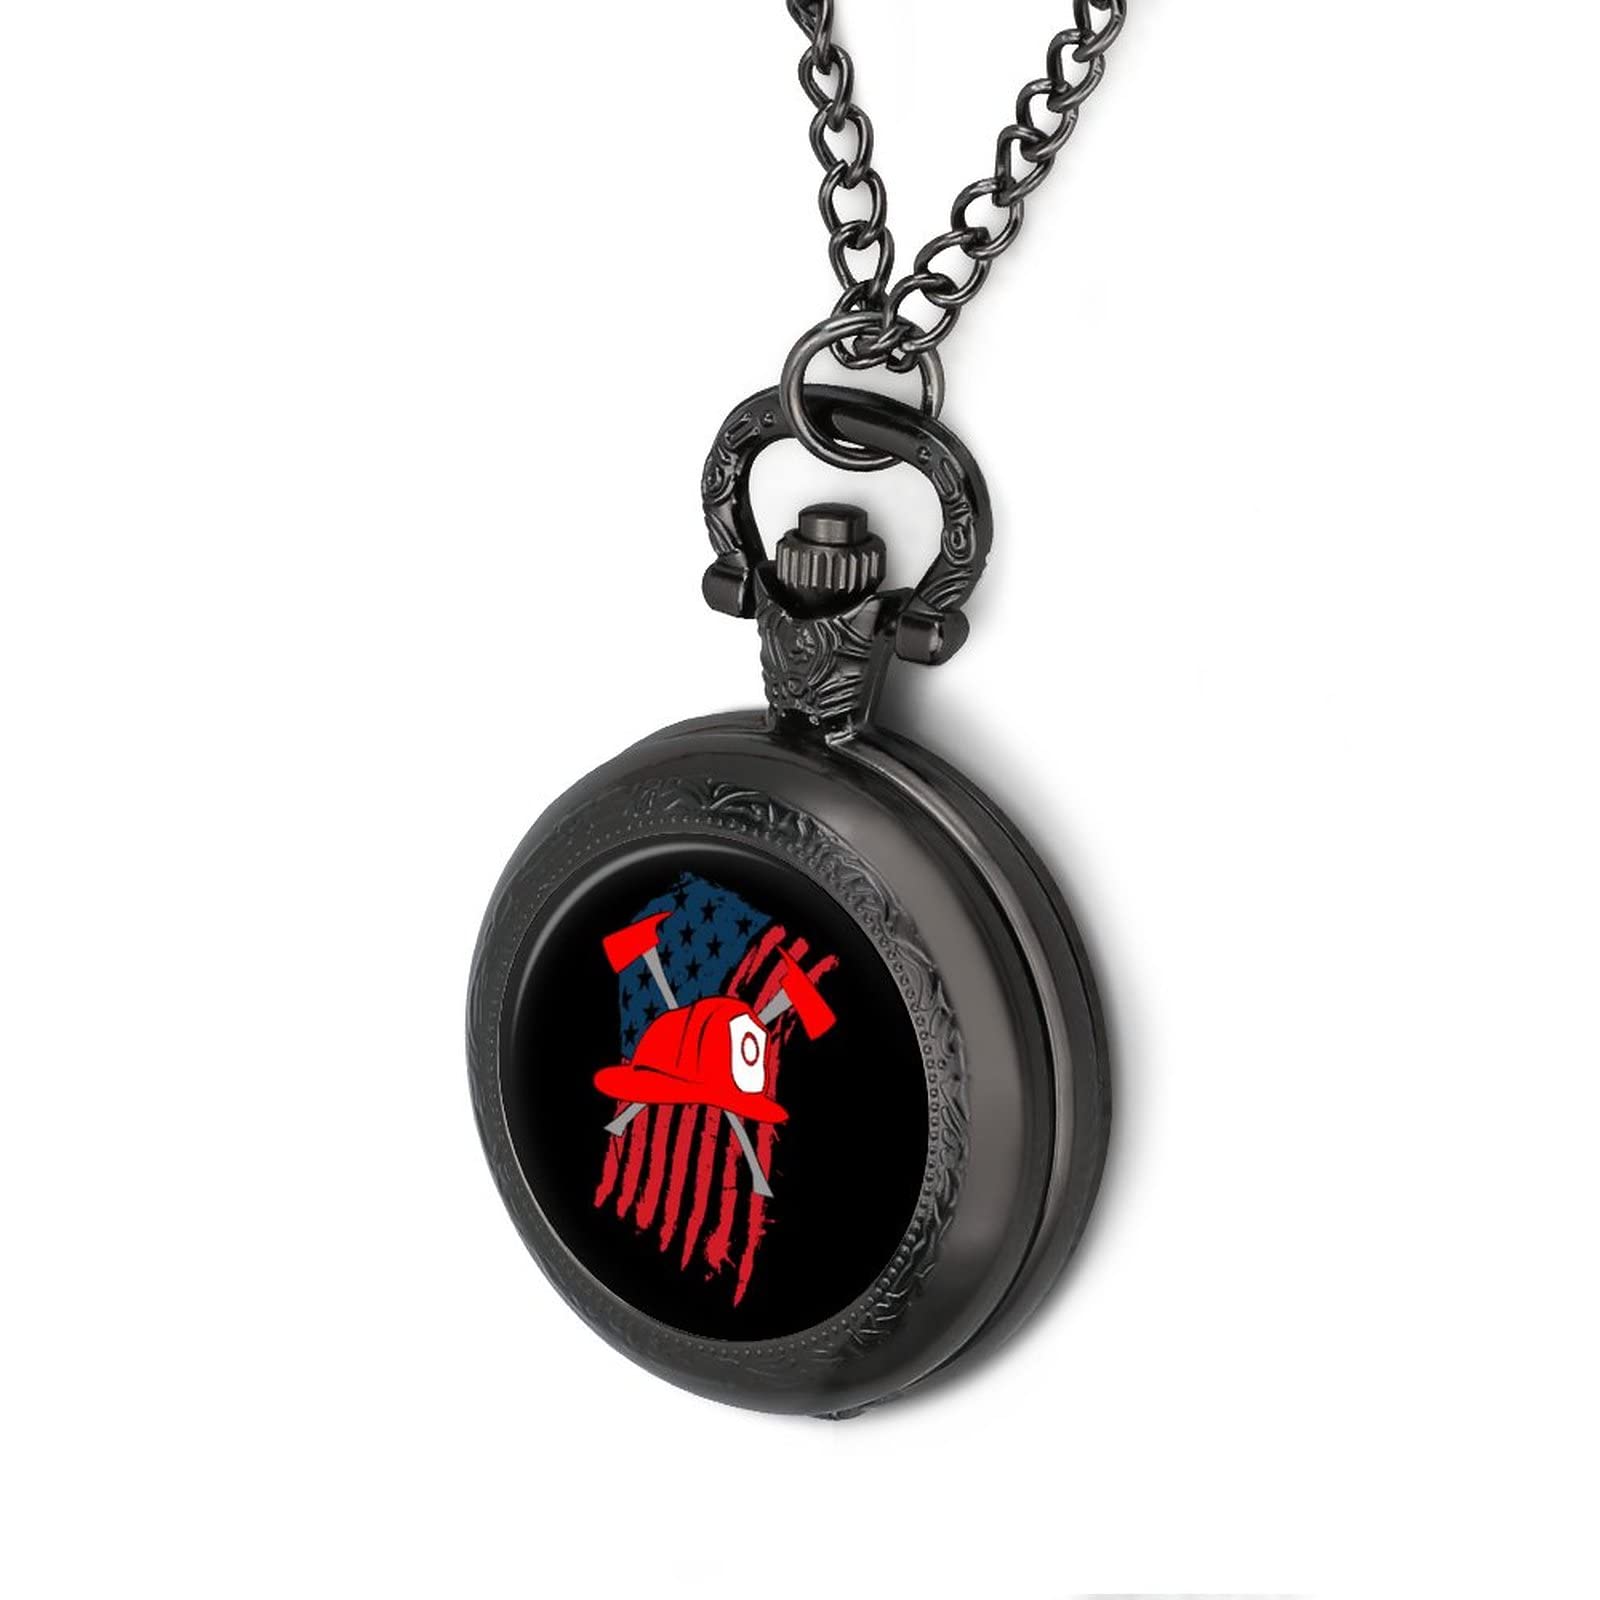 Firemans Axe USA Flag Pocket Watches for Men with Chain Digital Vintage Mechanical Pocket Watch